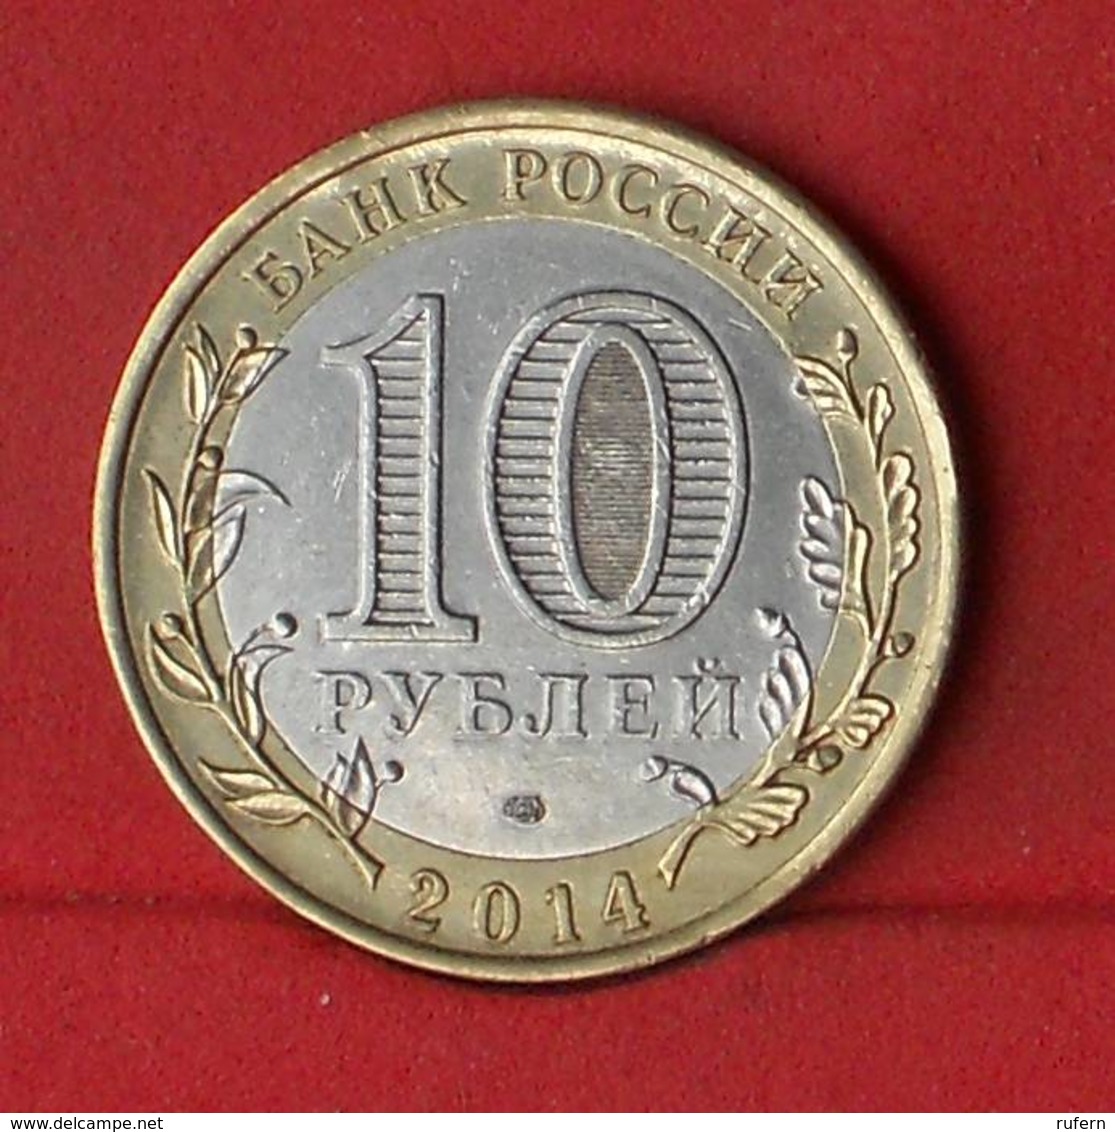 RUSSIA 10 ROUBLES 2014 -    KM# 1567 - (Nº27811) - Russie